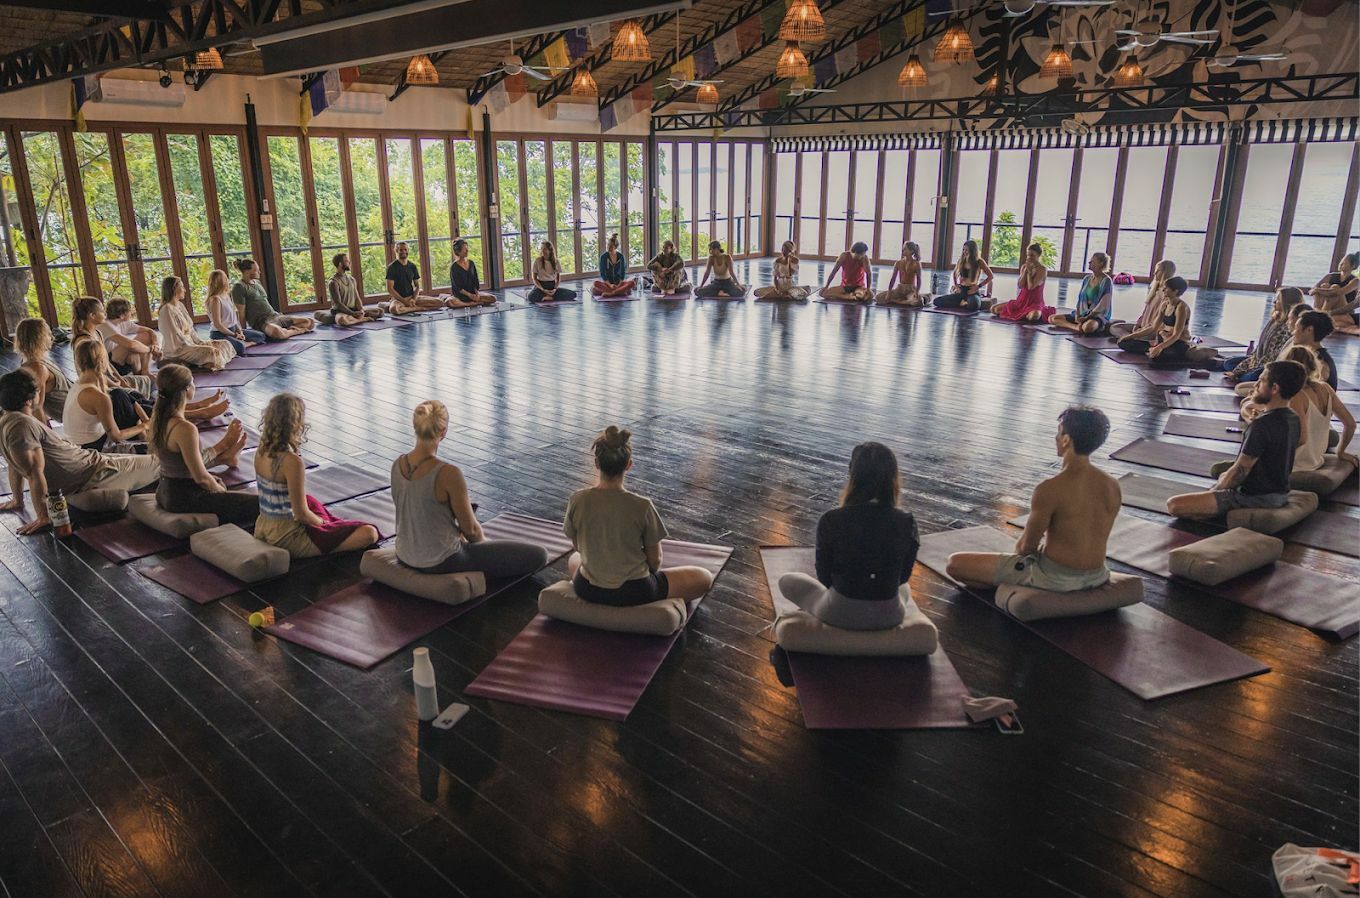 Yoga retreat in Koh Samui where you can reflect and relax | News by Thaiger